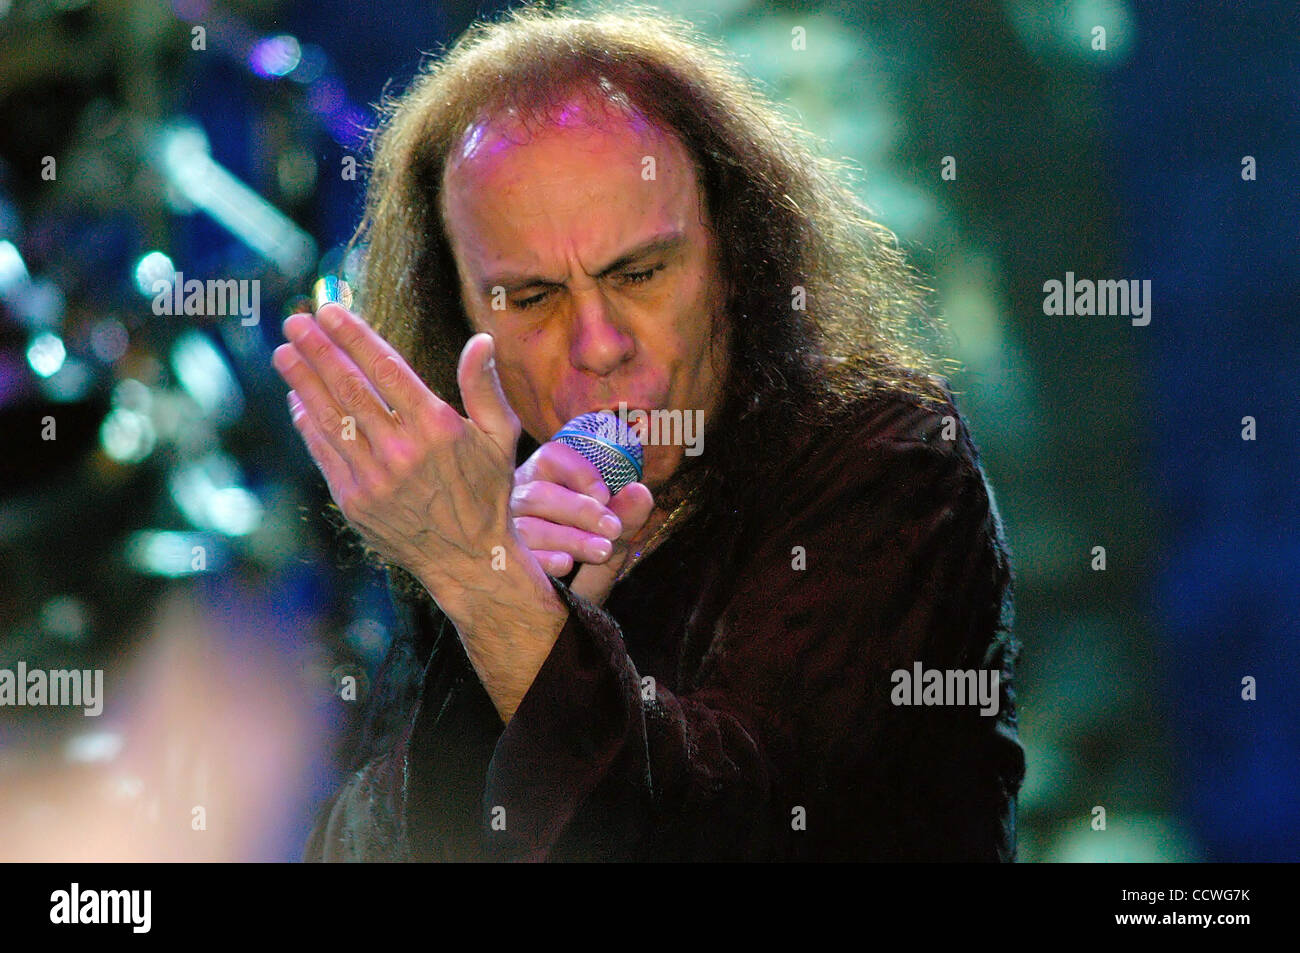 May 16, 2010 - Irvine, California, USA - RONNIE JAMES DIO (Jul. 10, 1942 - May 16, 2010), born Ronald James Padavona, was rock vocalist and songwriter who performed with the bands Elf, Rainbow, Black Sabbath, Heaven & Hell, and his own band Dio. He was widely hailed as one of the most powerful singe Stock Photo